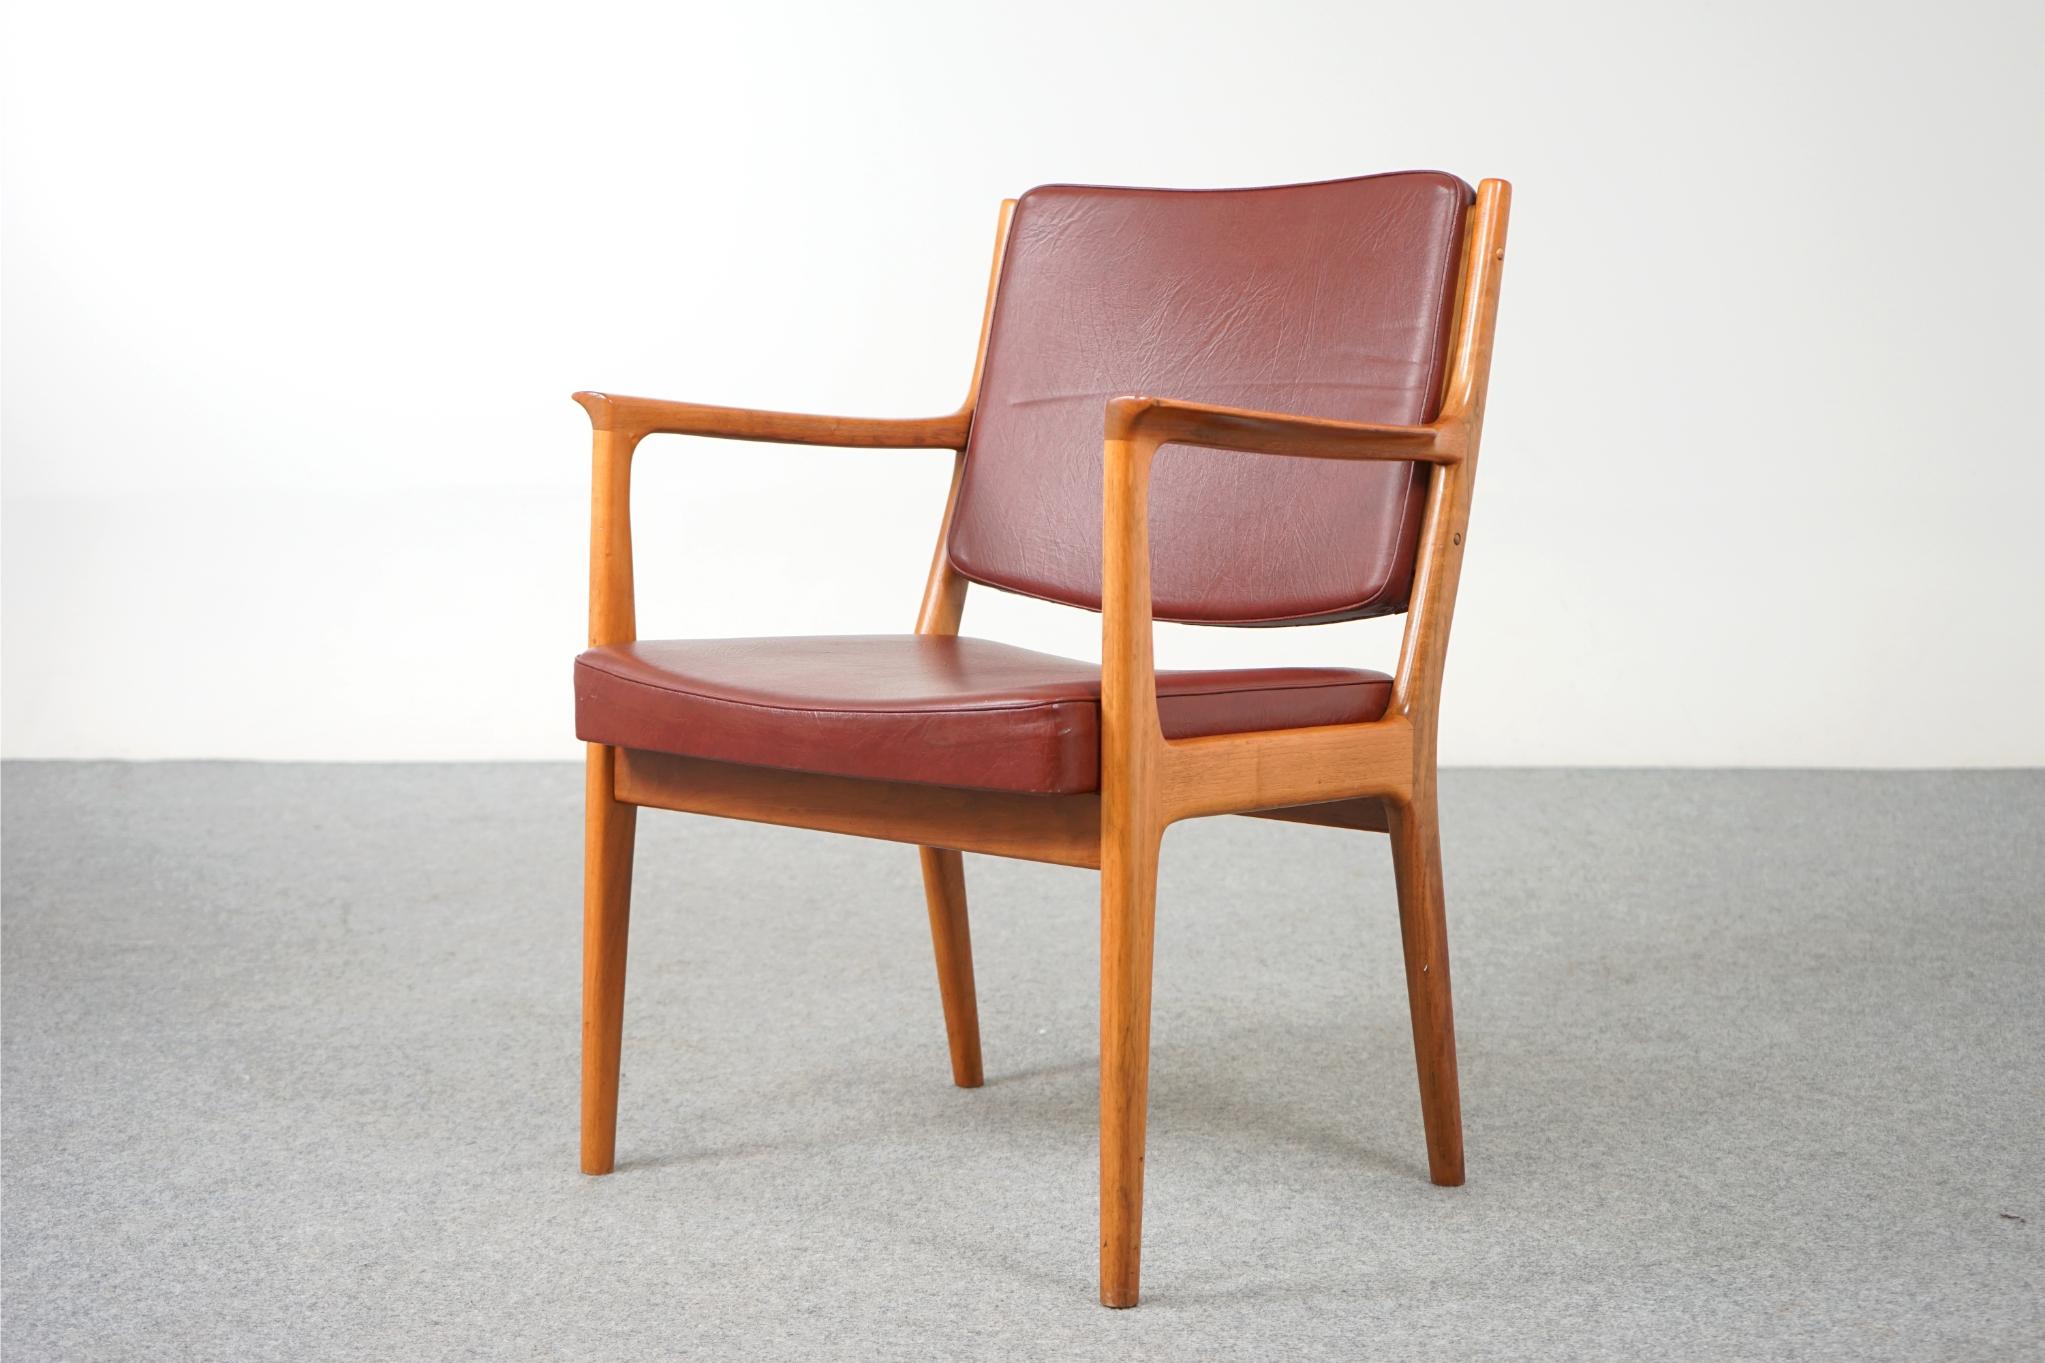 Walnut Danish armchair, circa 1970's. Sturdy solid wood frame is wonderfully scaled for your many seating needs, home or office! The elegant frame with swooping arms makes this clean modern design easy to combine with other furniture. 

Relax in